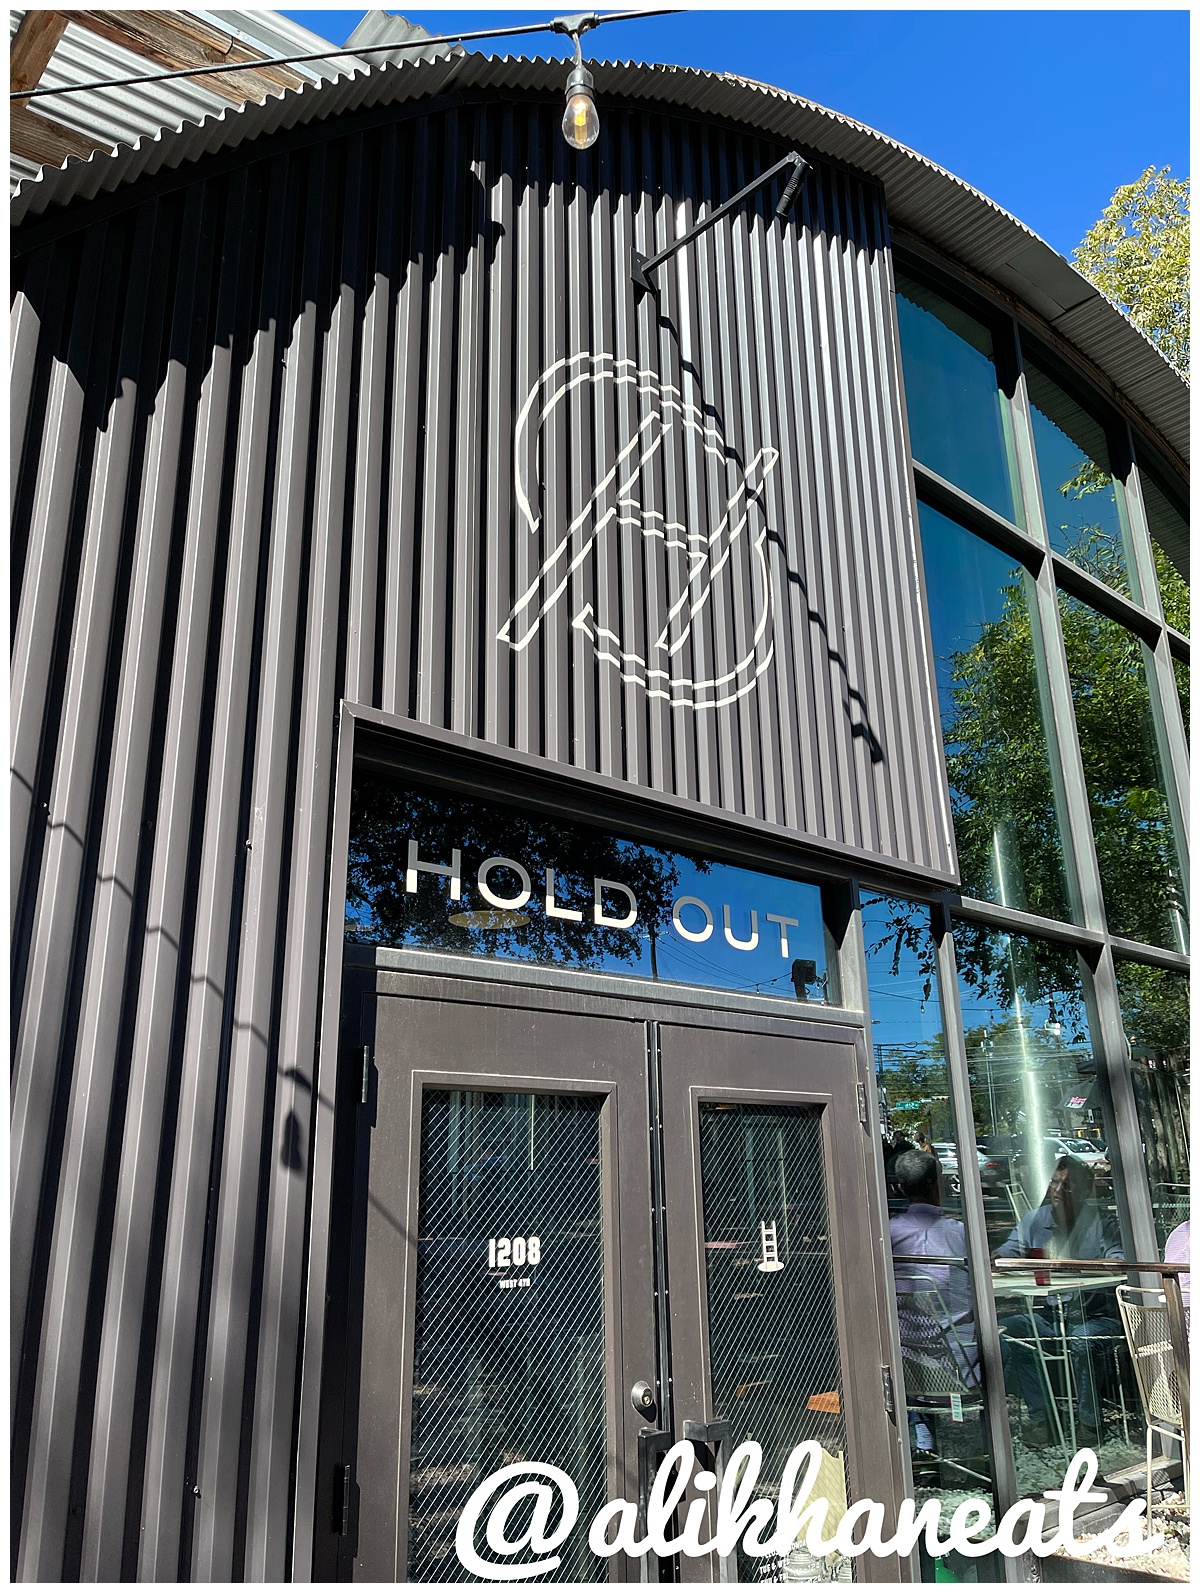 Hold Out Brewing door